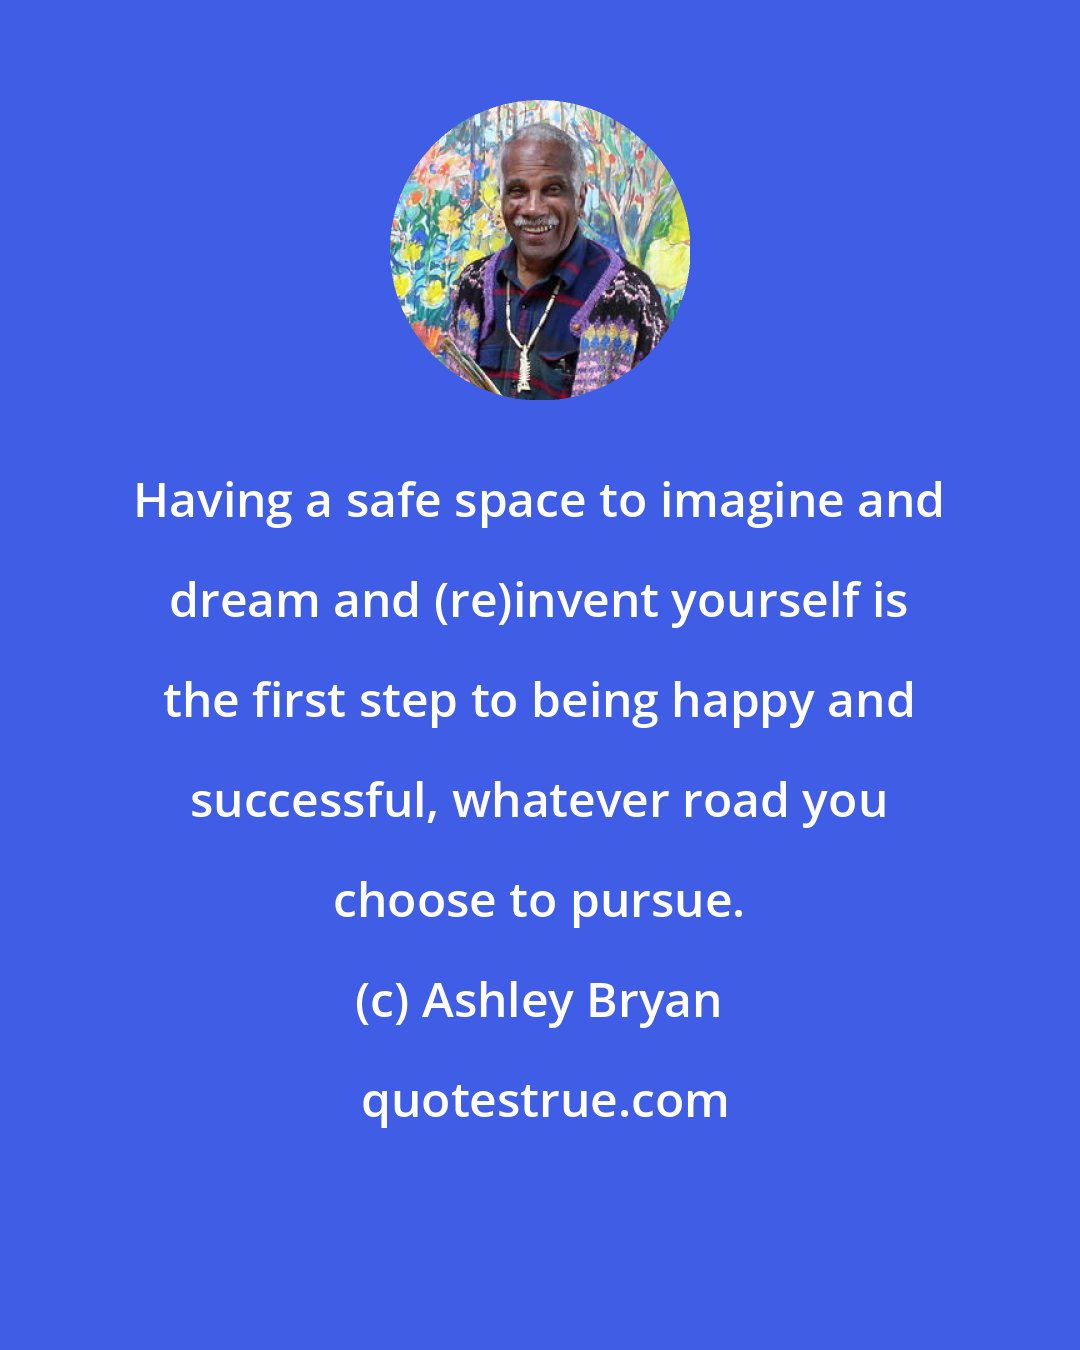 Ashley Bryan: Having a safe space to imagine and dream and (re)invent yourself is the first step to being happy and successful, whatever road you choose to pursue.